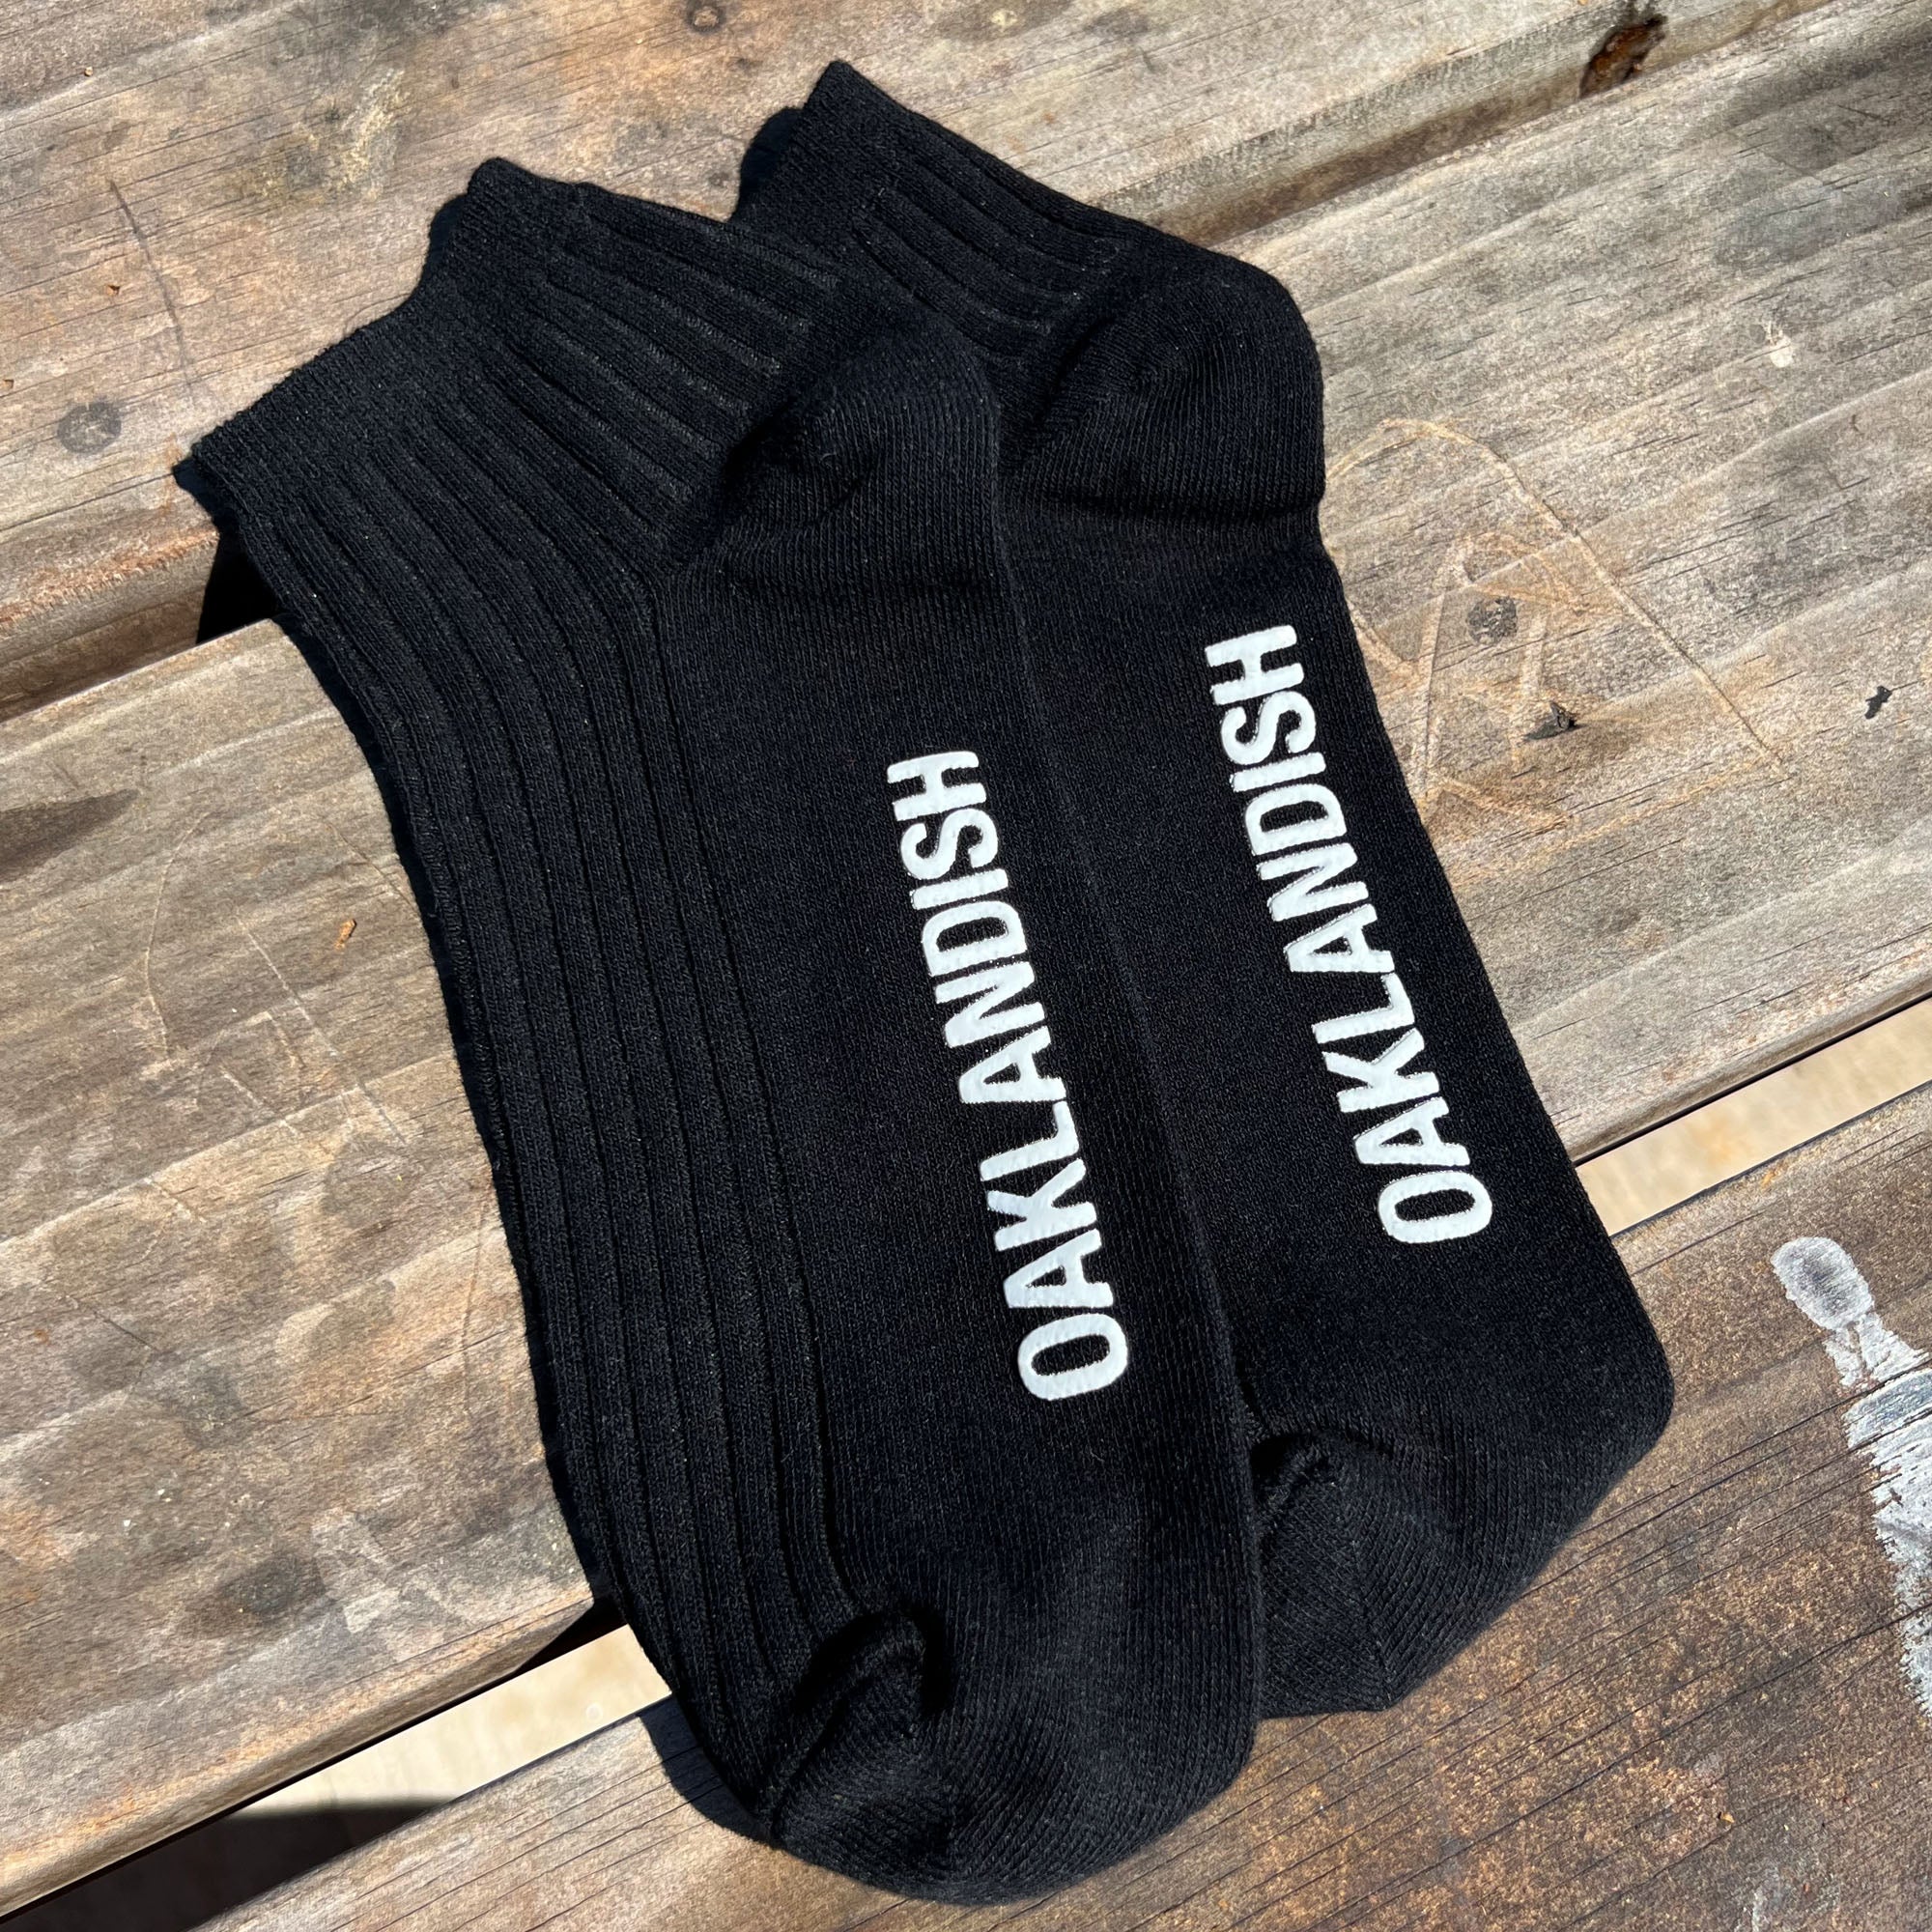 Men's Low Crew Socks in black without packaging. Oaklandish text across sole. Socks positioned on wooden bench in natural light.